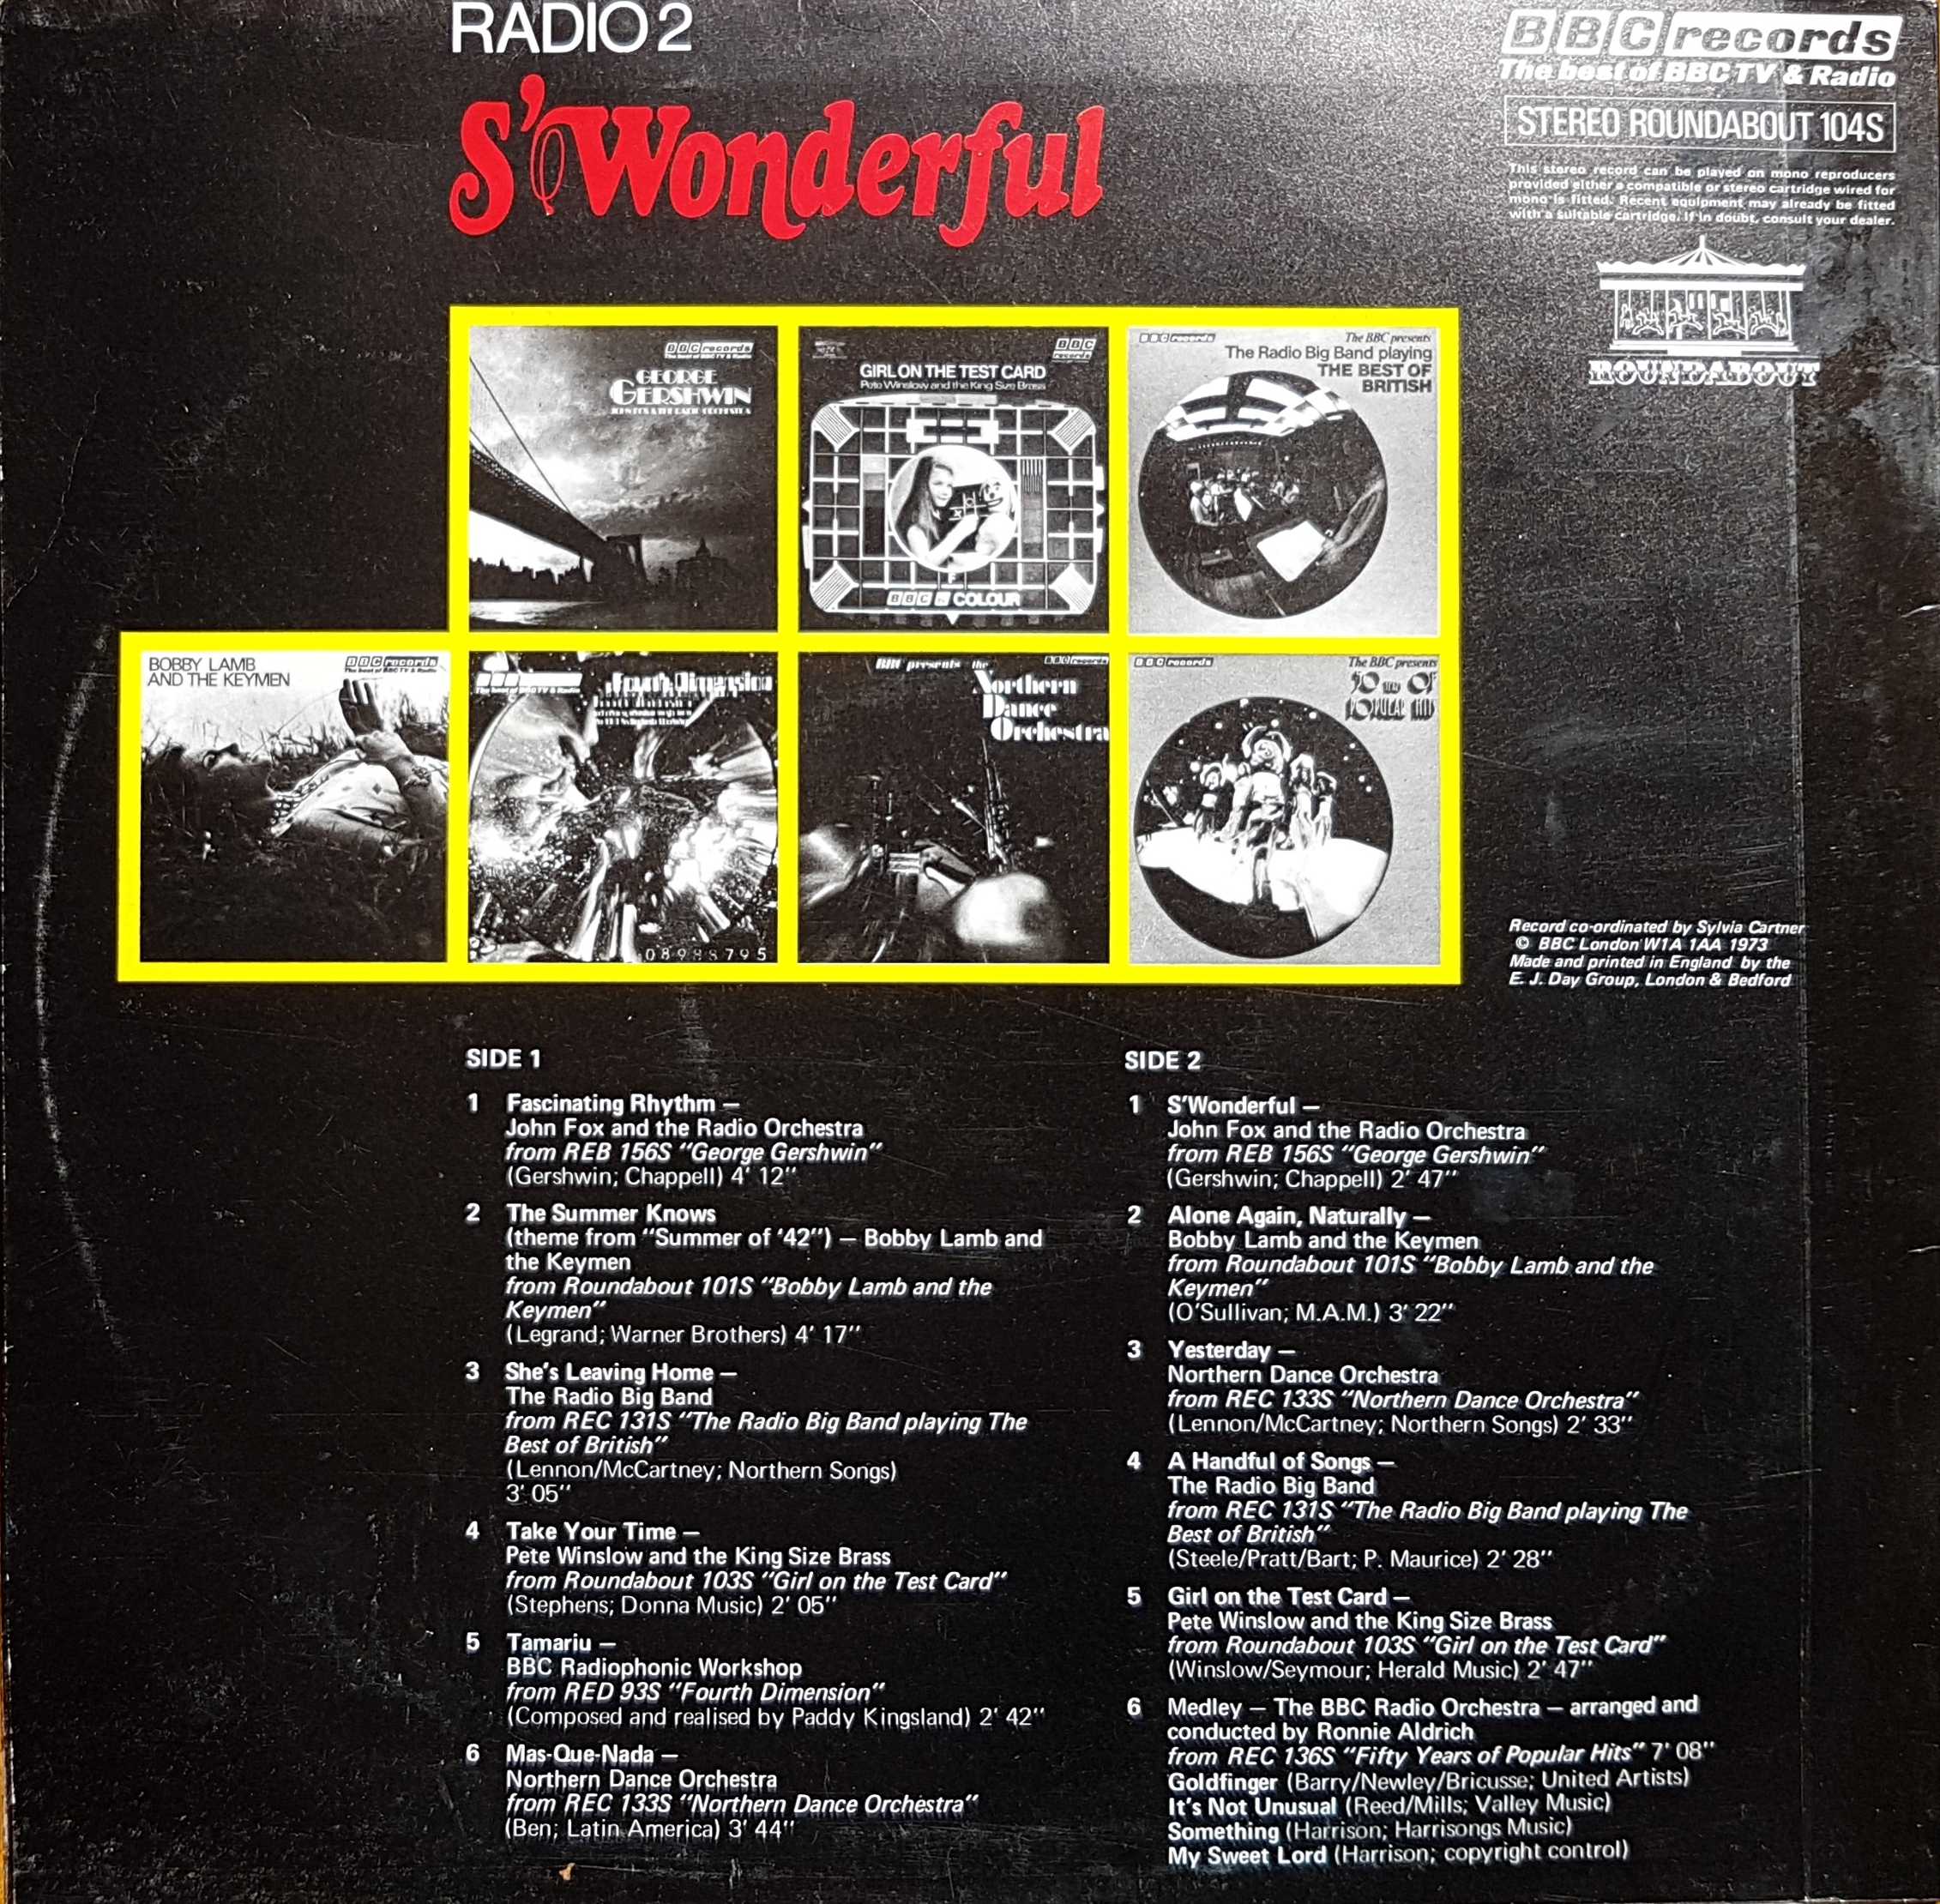 Picture of RBT 104 S'Wonderful by artist Various from the BBC records and Tapes library